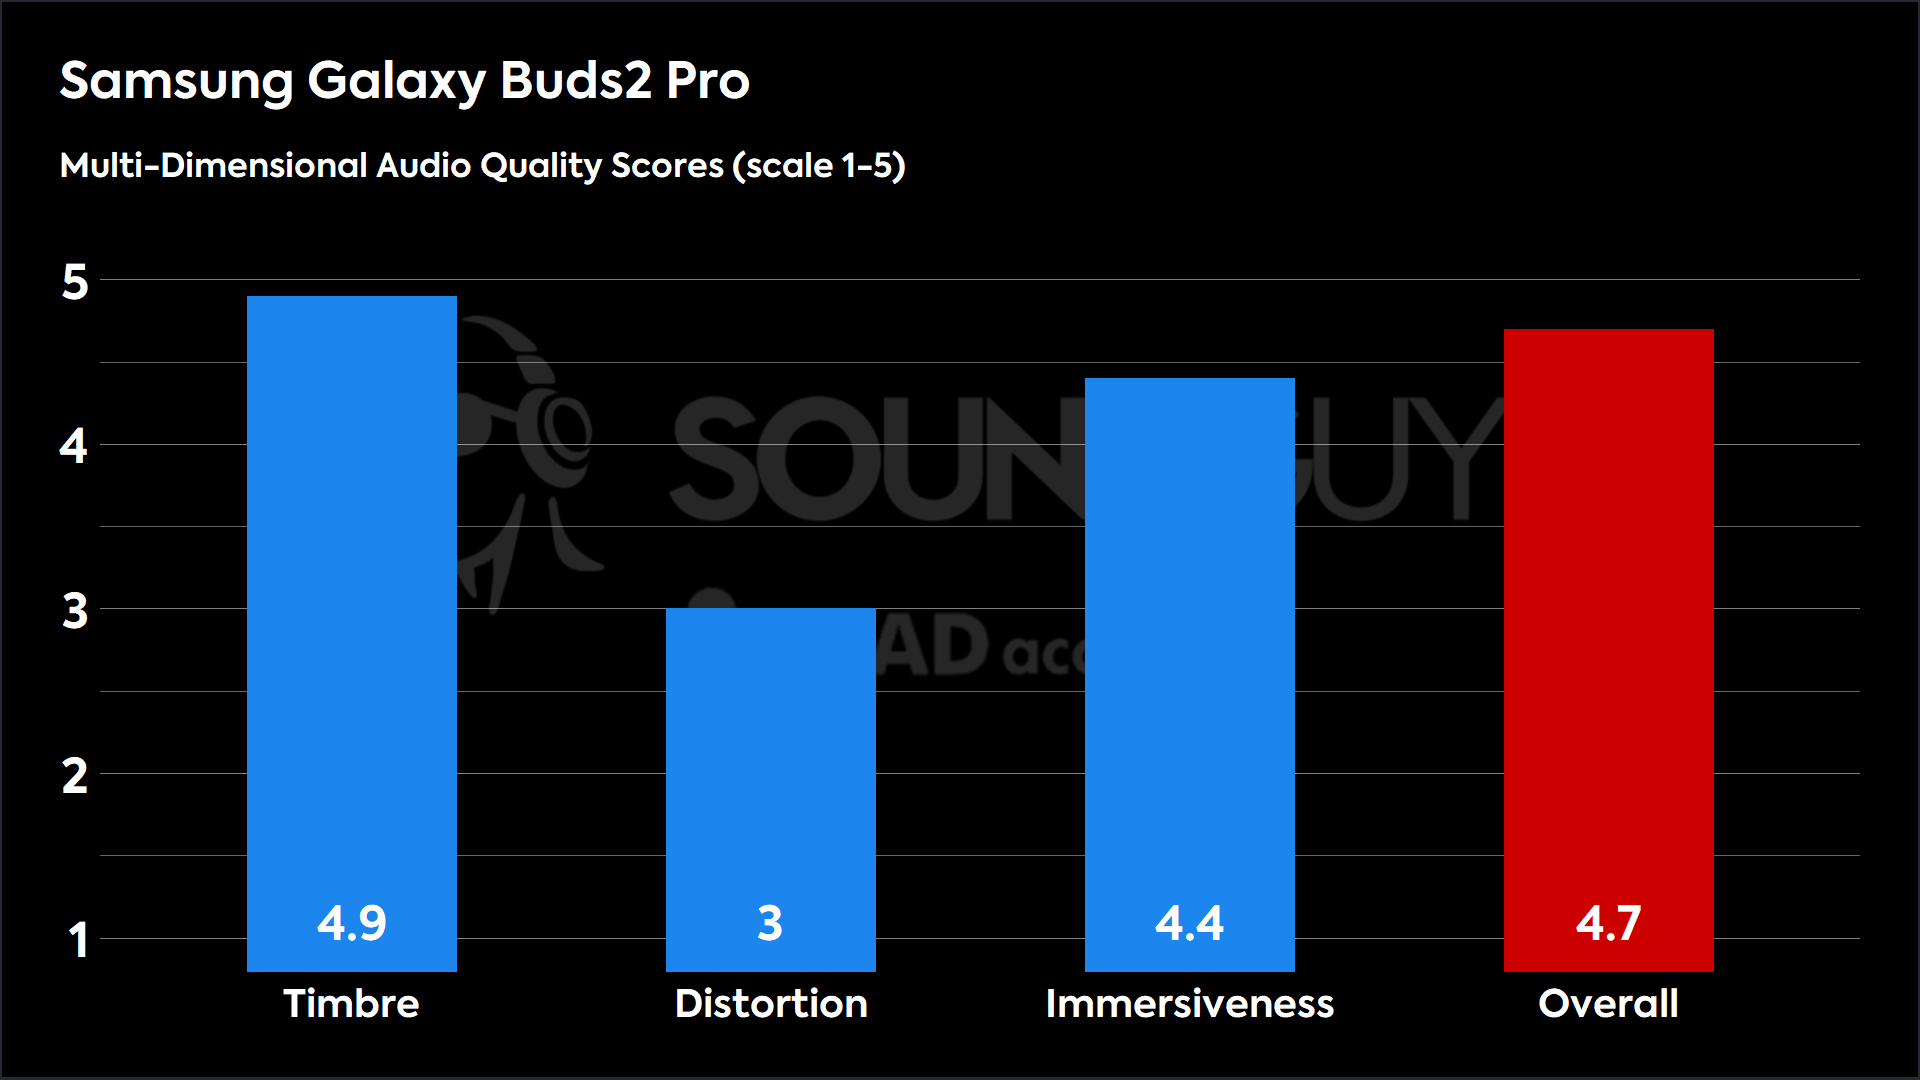 This chart shows the MDAQS results for the Samsung Galaxy Buds2 Pro in Default mode. The Timbre score is 4.9, The Distortion score is 3, the Immersiveness score is 4.4, and the Overall Score is 4.7).